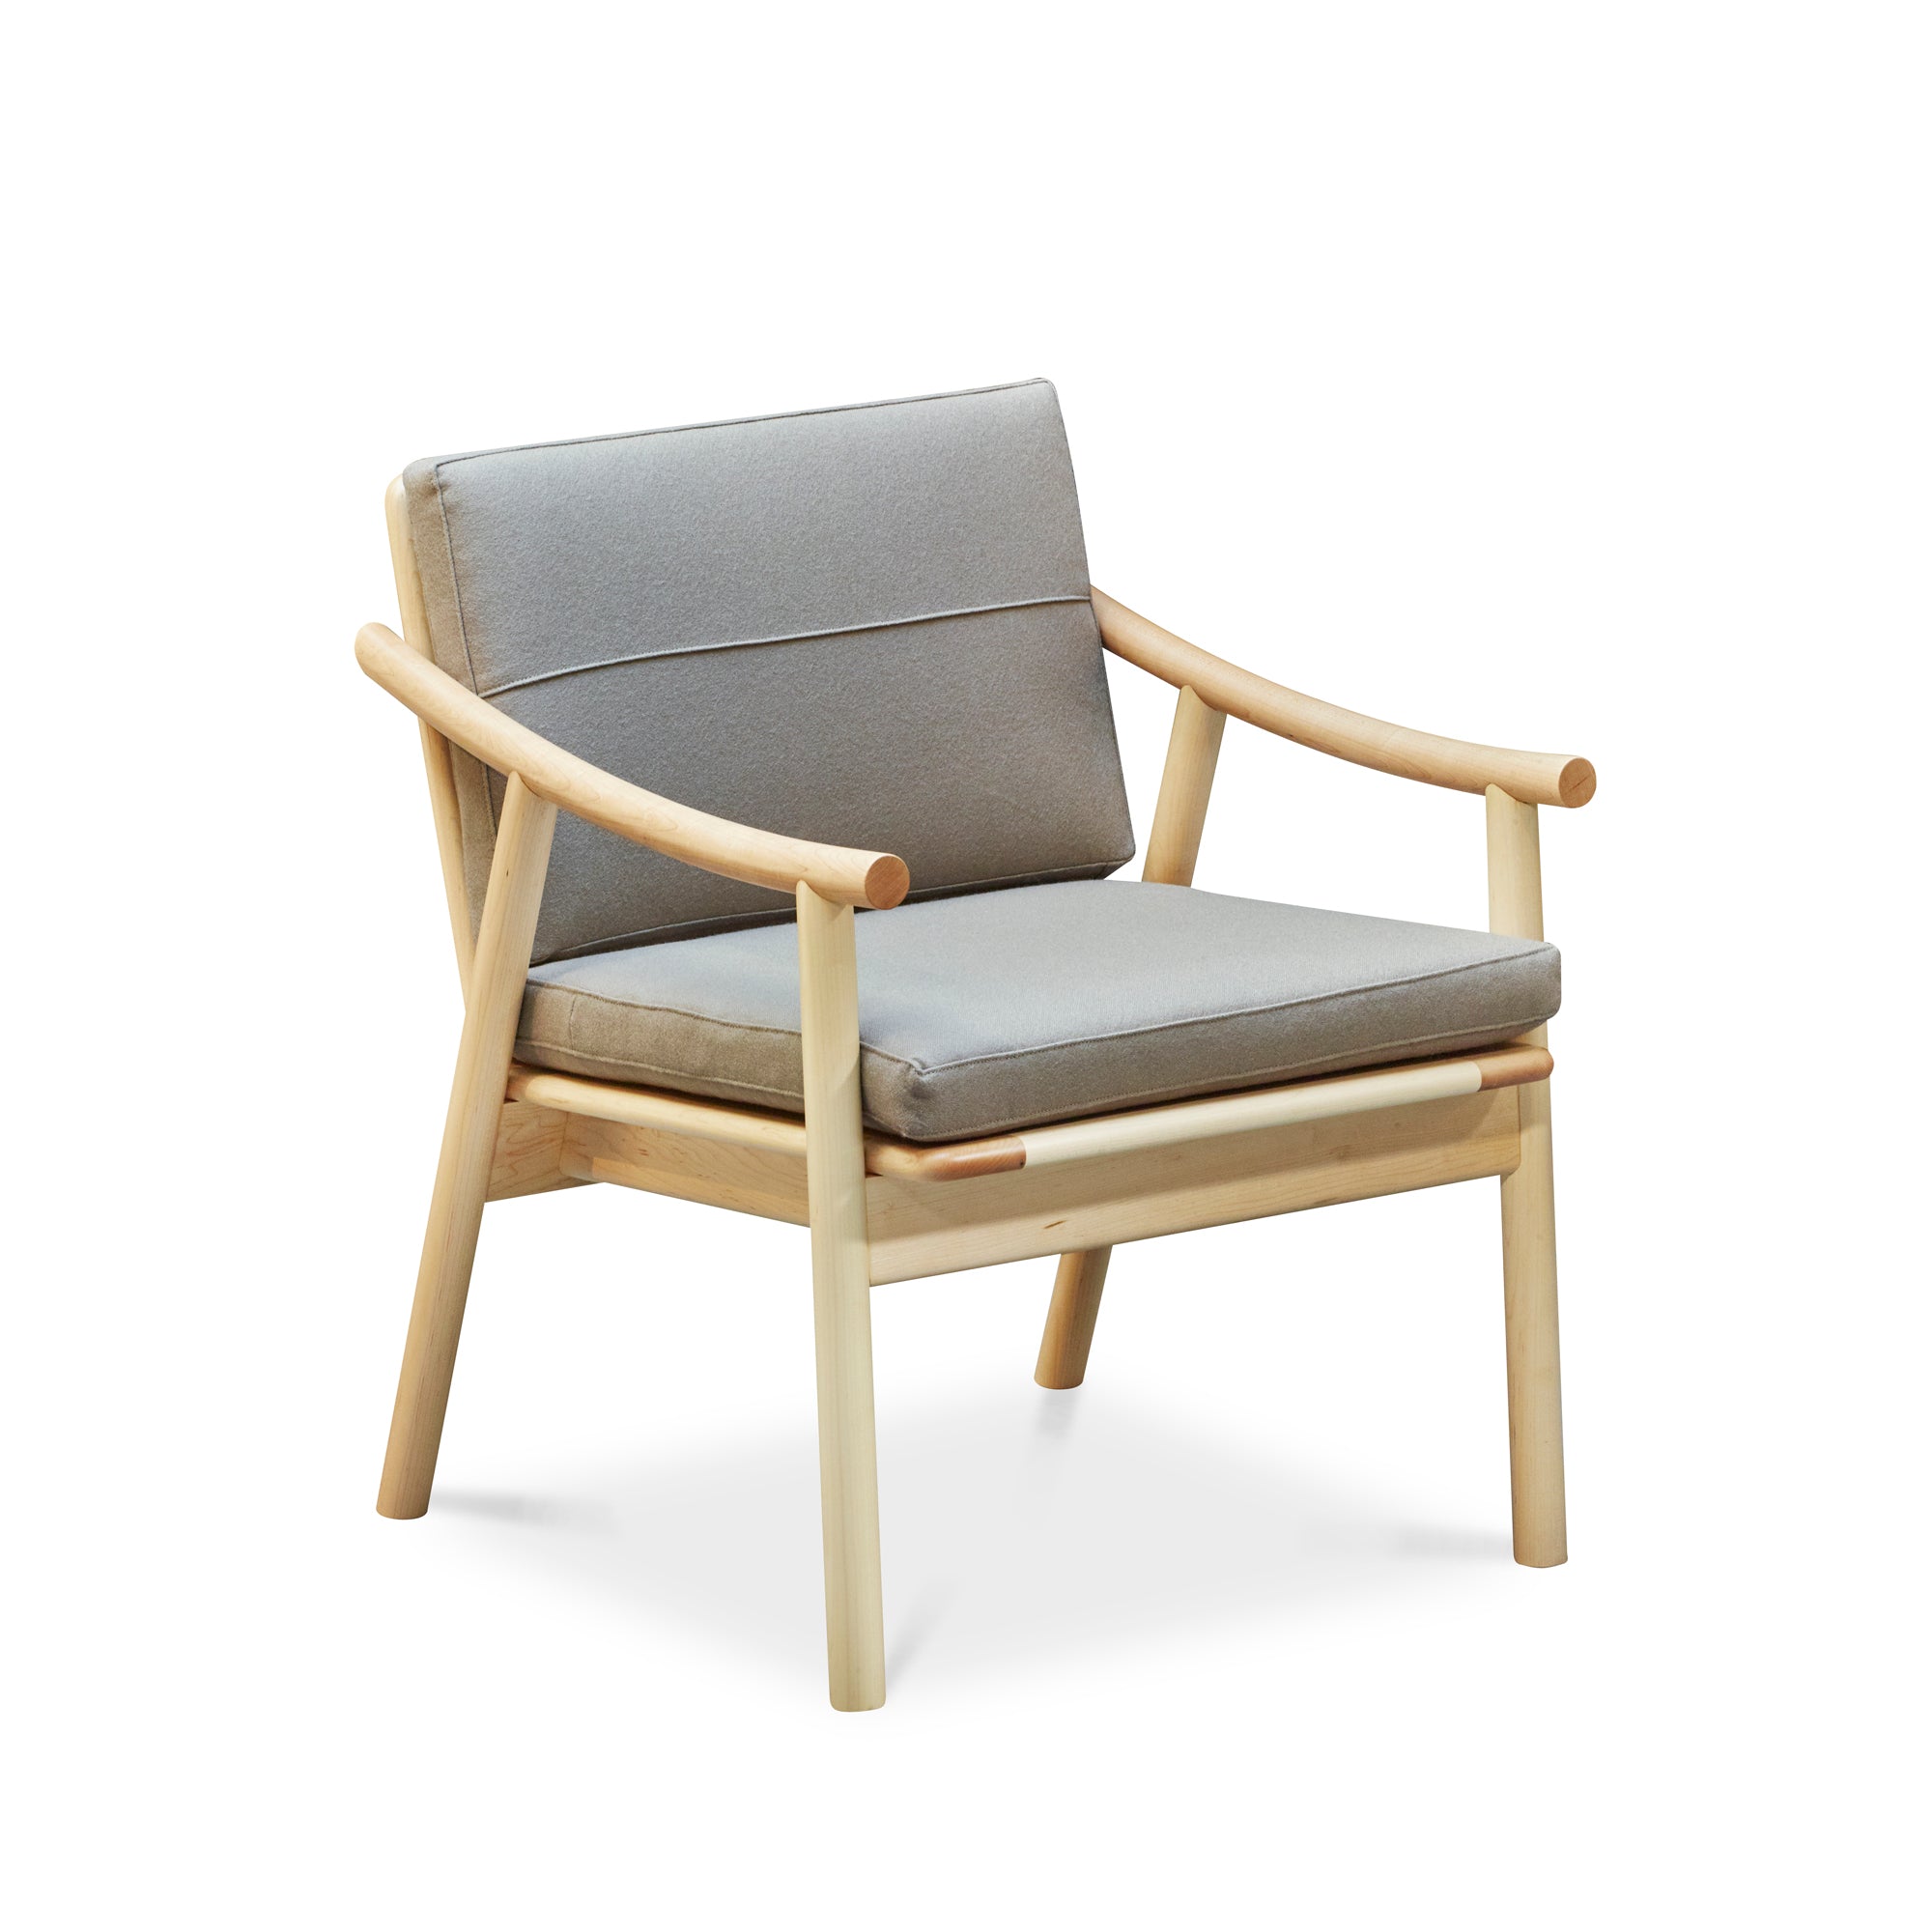 Solid maple Scandinavian style lounge chair with Knoll fabric cushions in Putty, from Maine's Chilton Furniture Co.